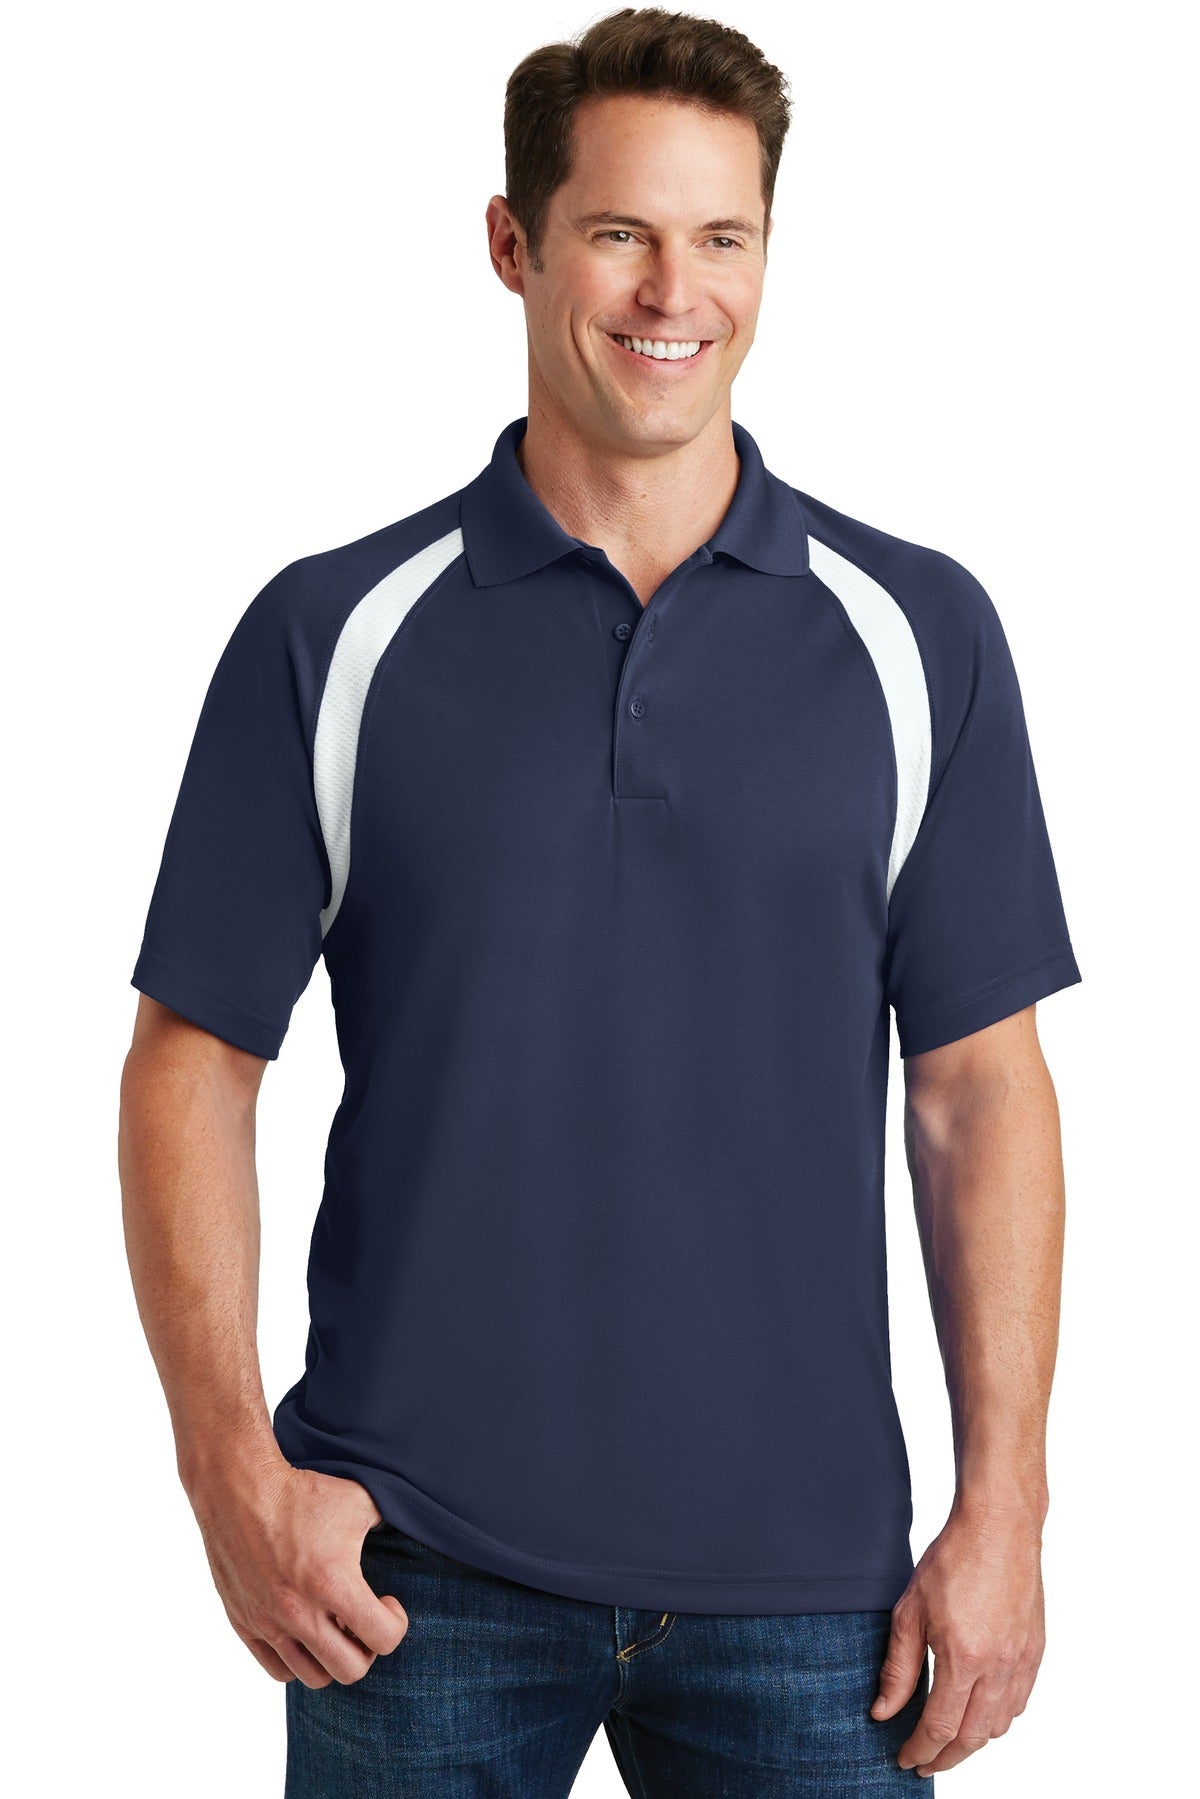 Photo of Sport-Tek Polos/Knits T476  color  True Navy/ White